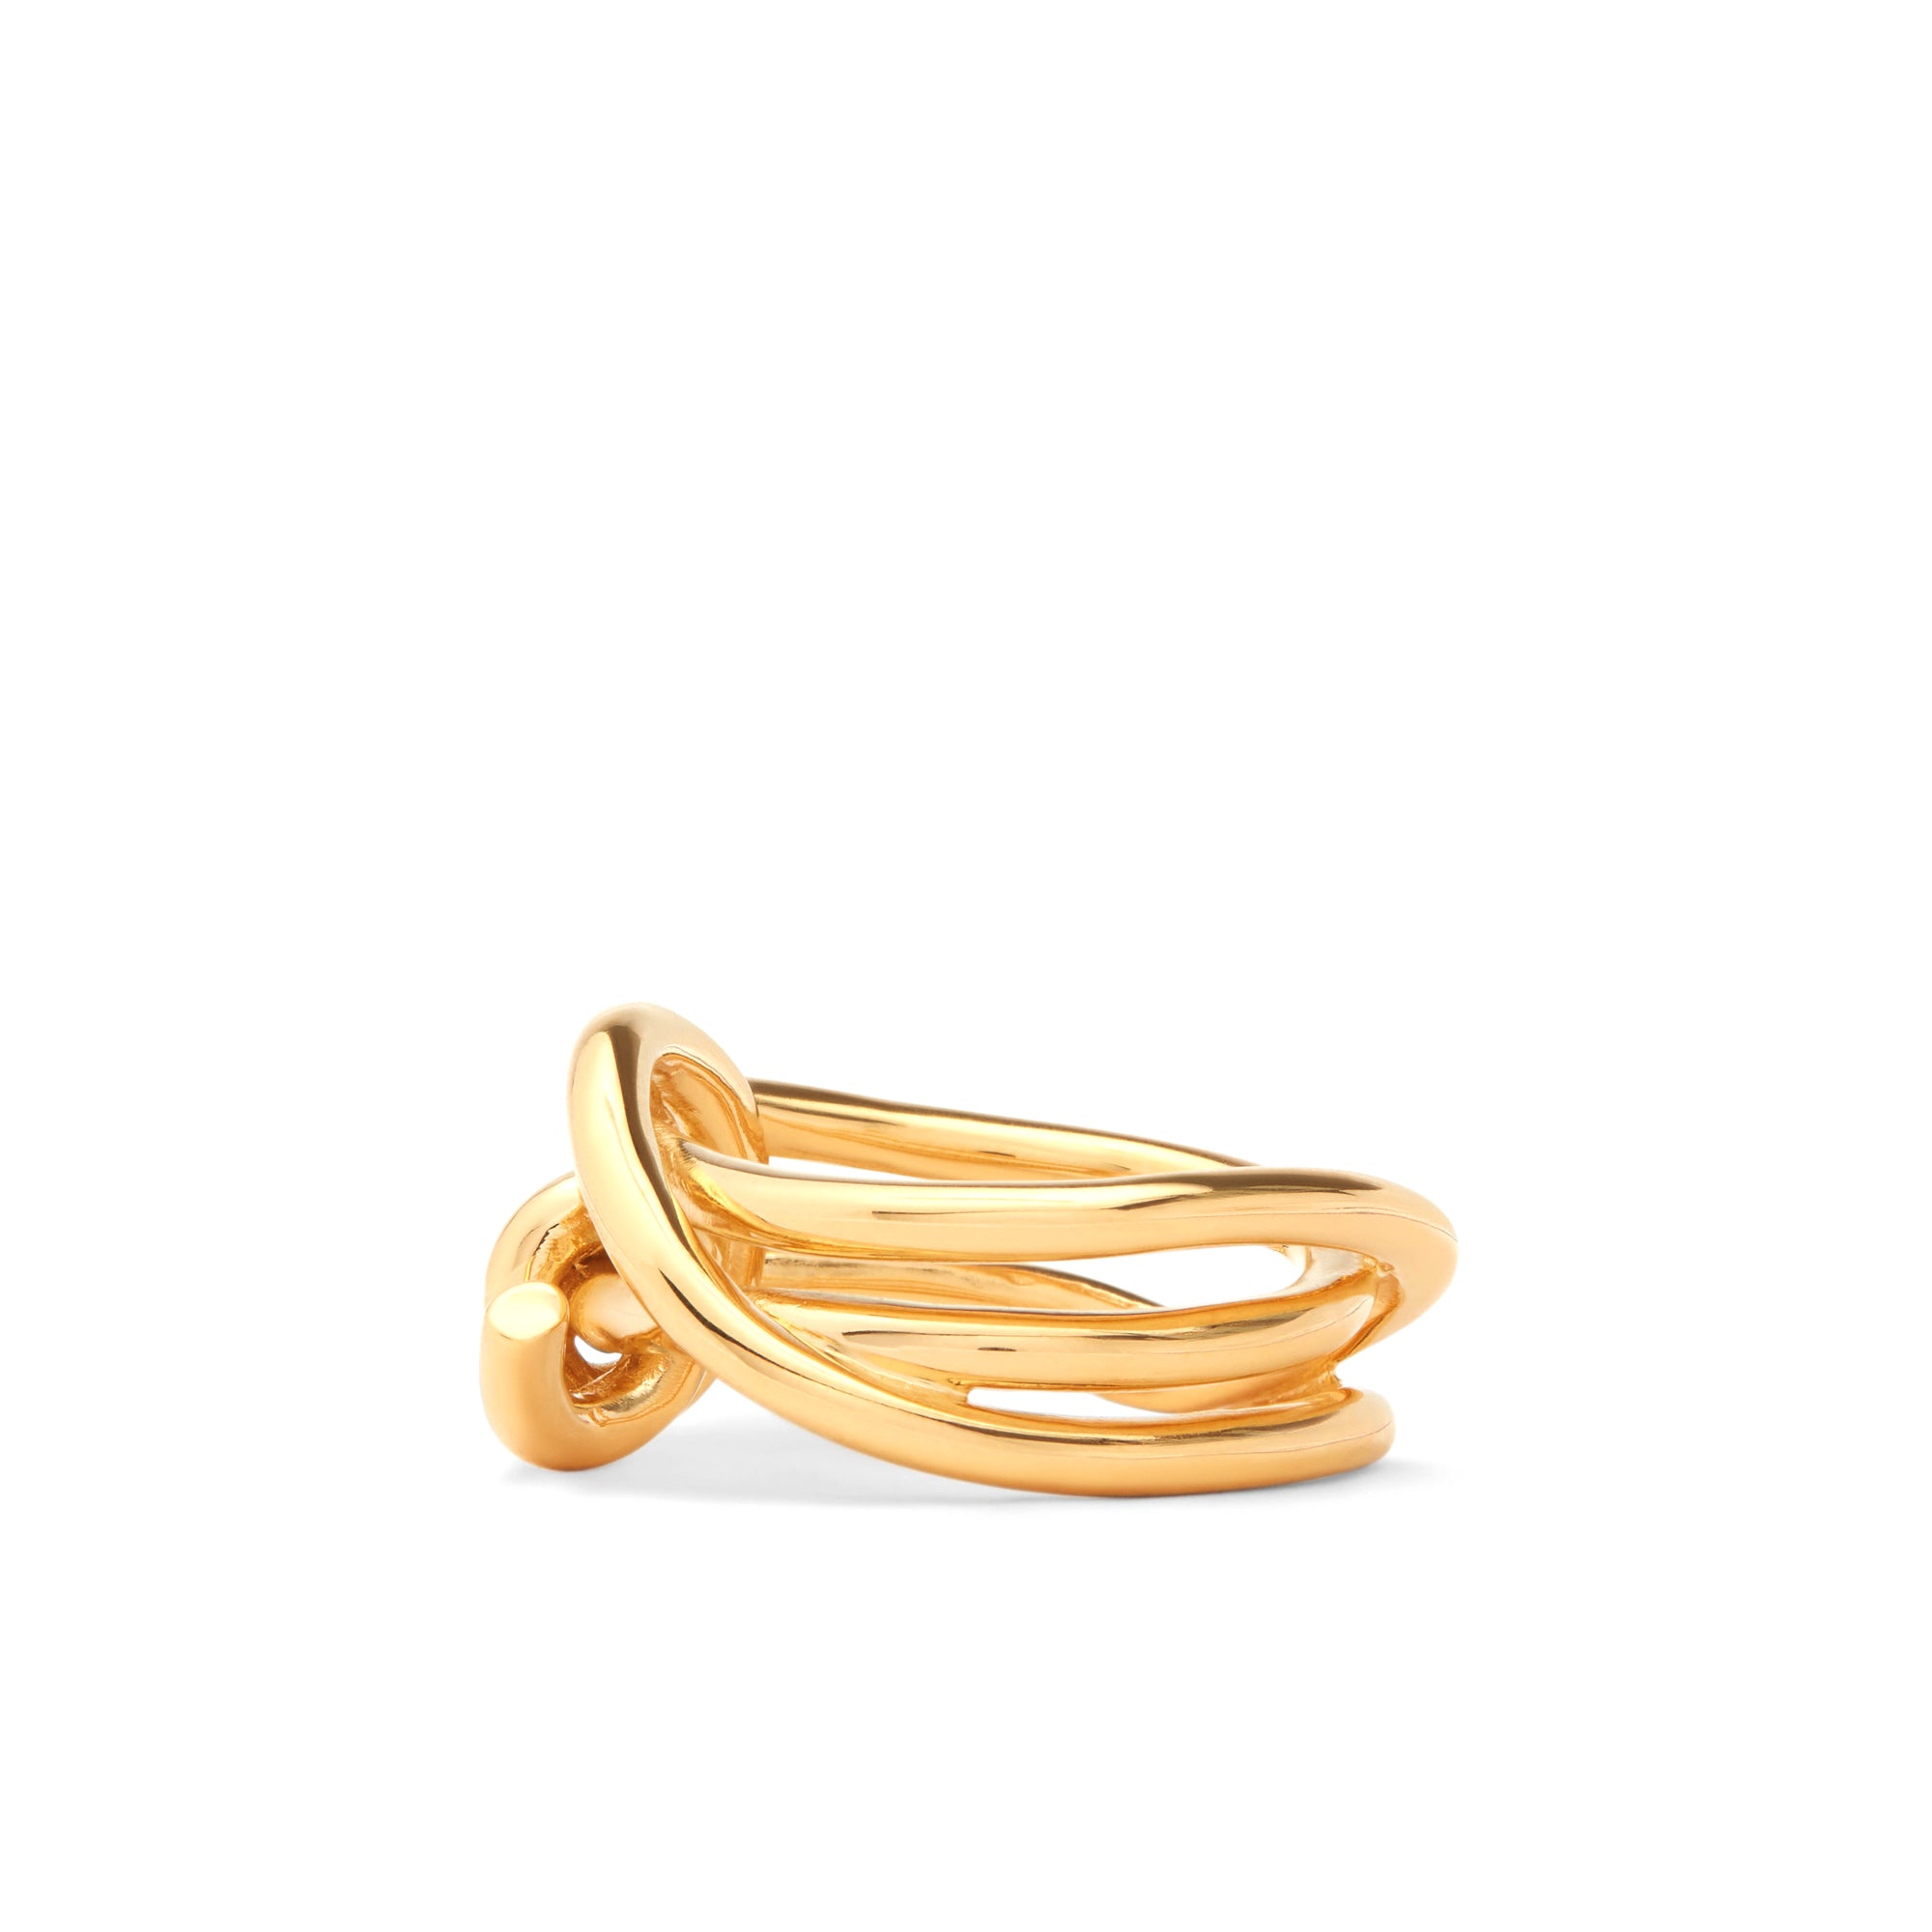 Completedworks - DSM Exclusive Knotted Ring - (Yellow Gold) view 2